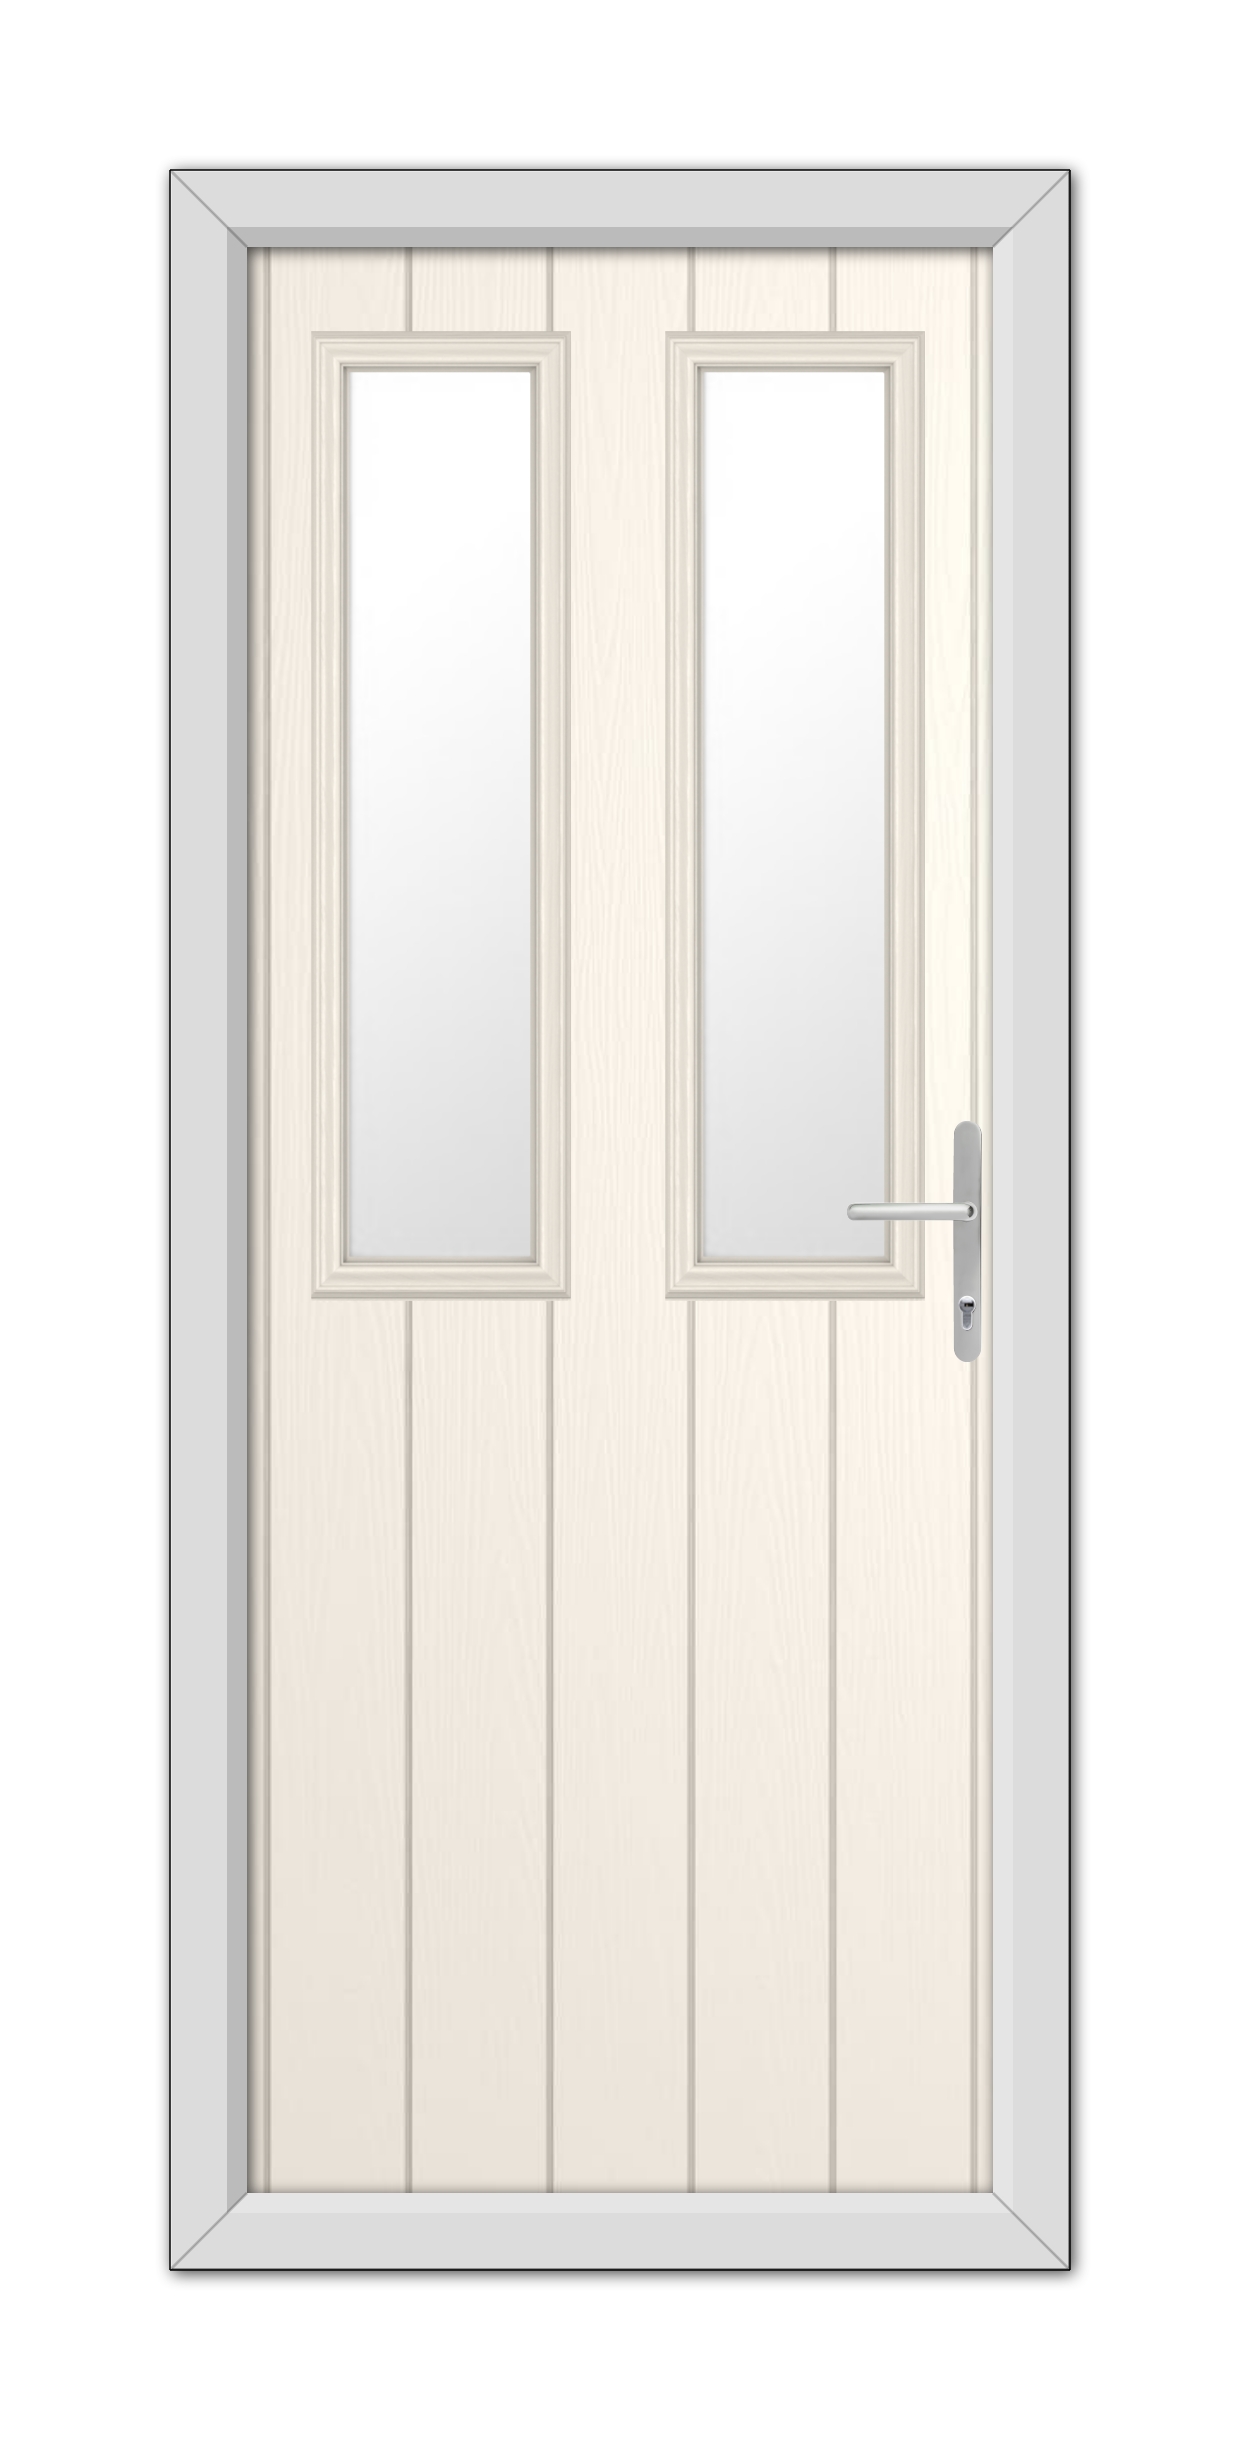 White Foil Wellington Composite Door with glass panels and a metal handle, set within a simple frame, isolated on a white background.